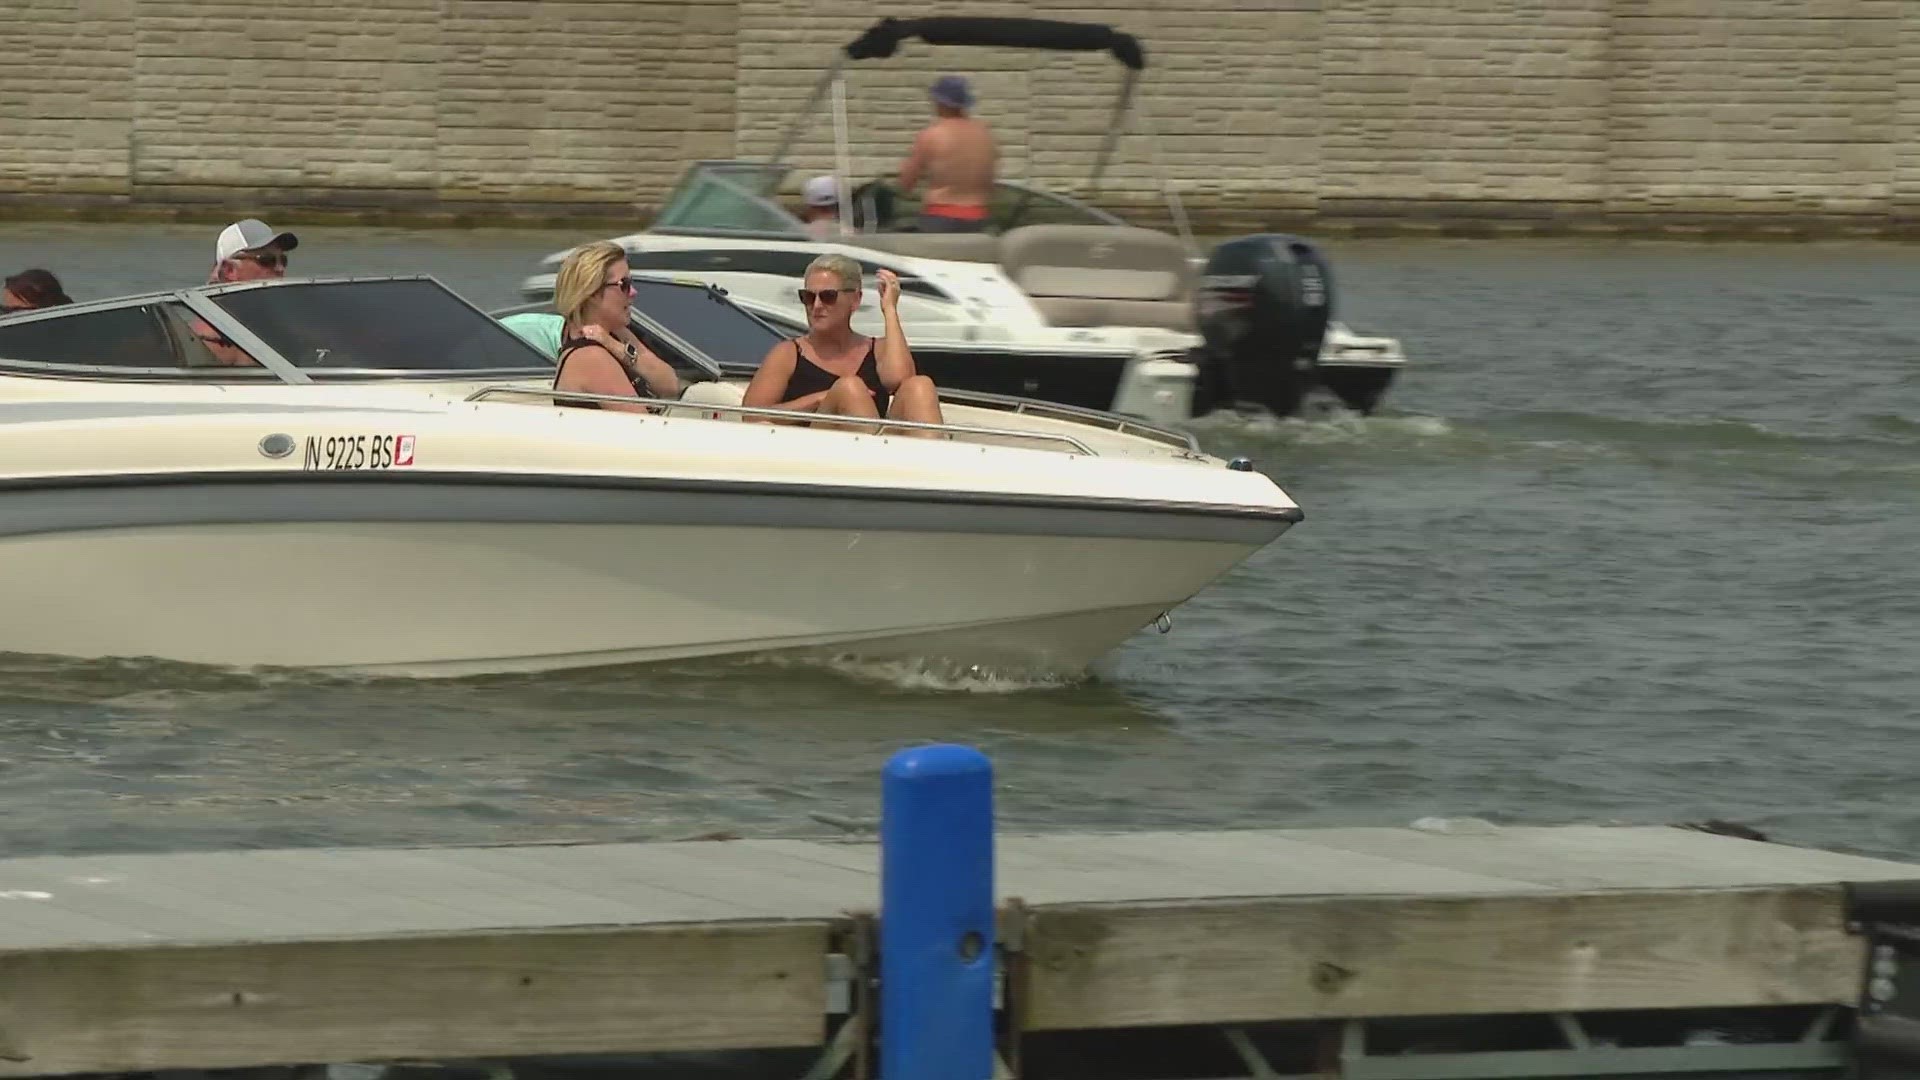 The Department of Natural Resources reminds Indiana boaters to plan ahead for a safe time on the water.